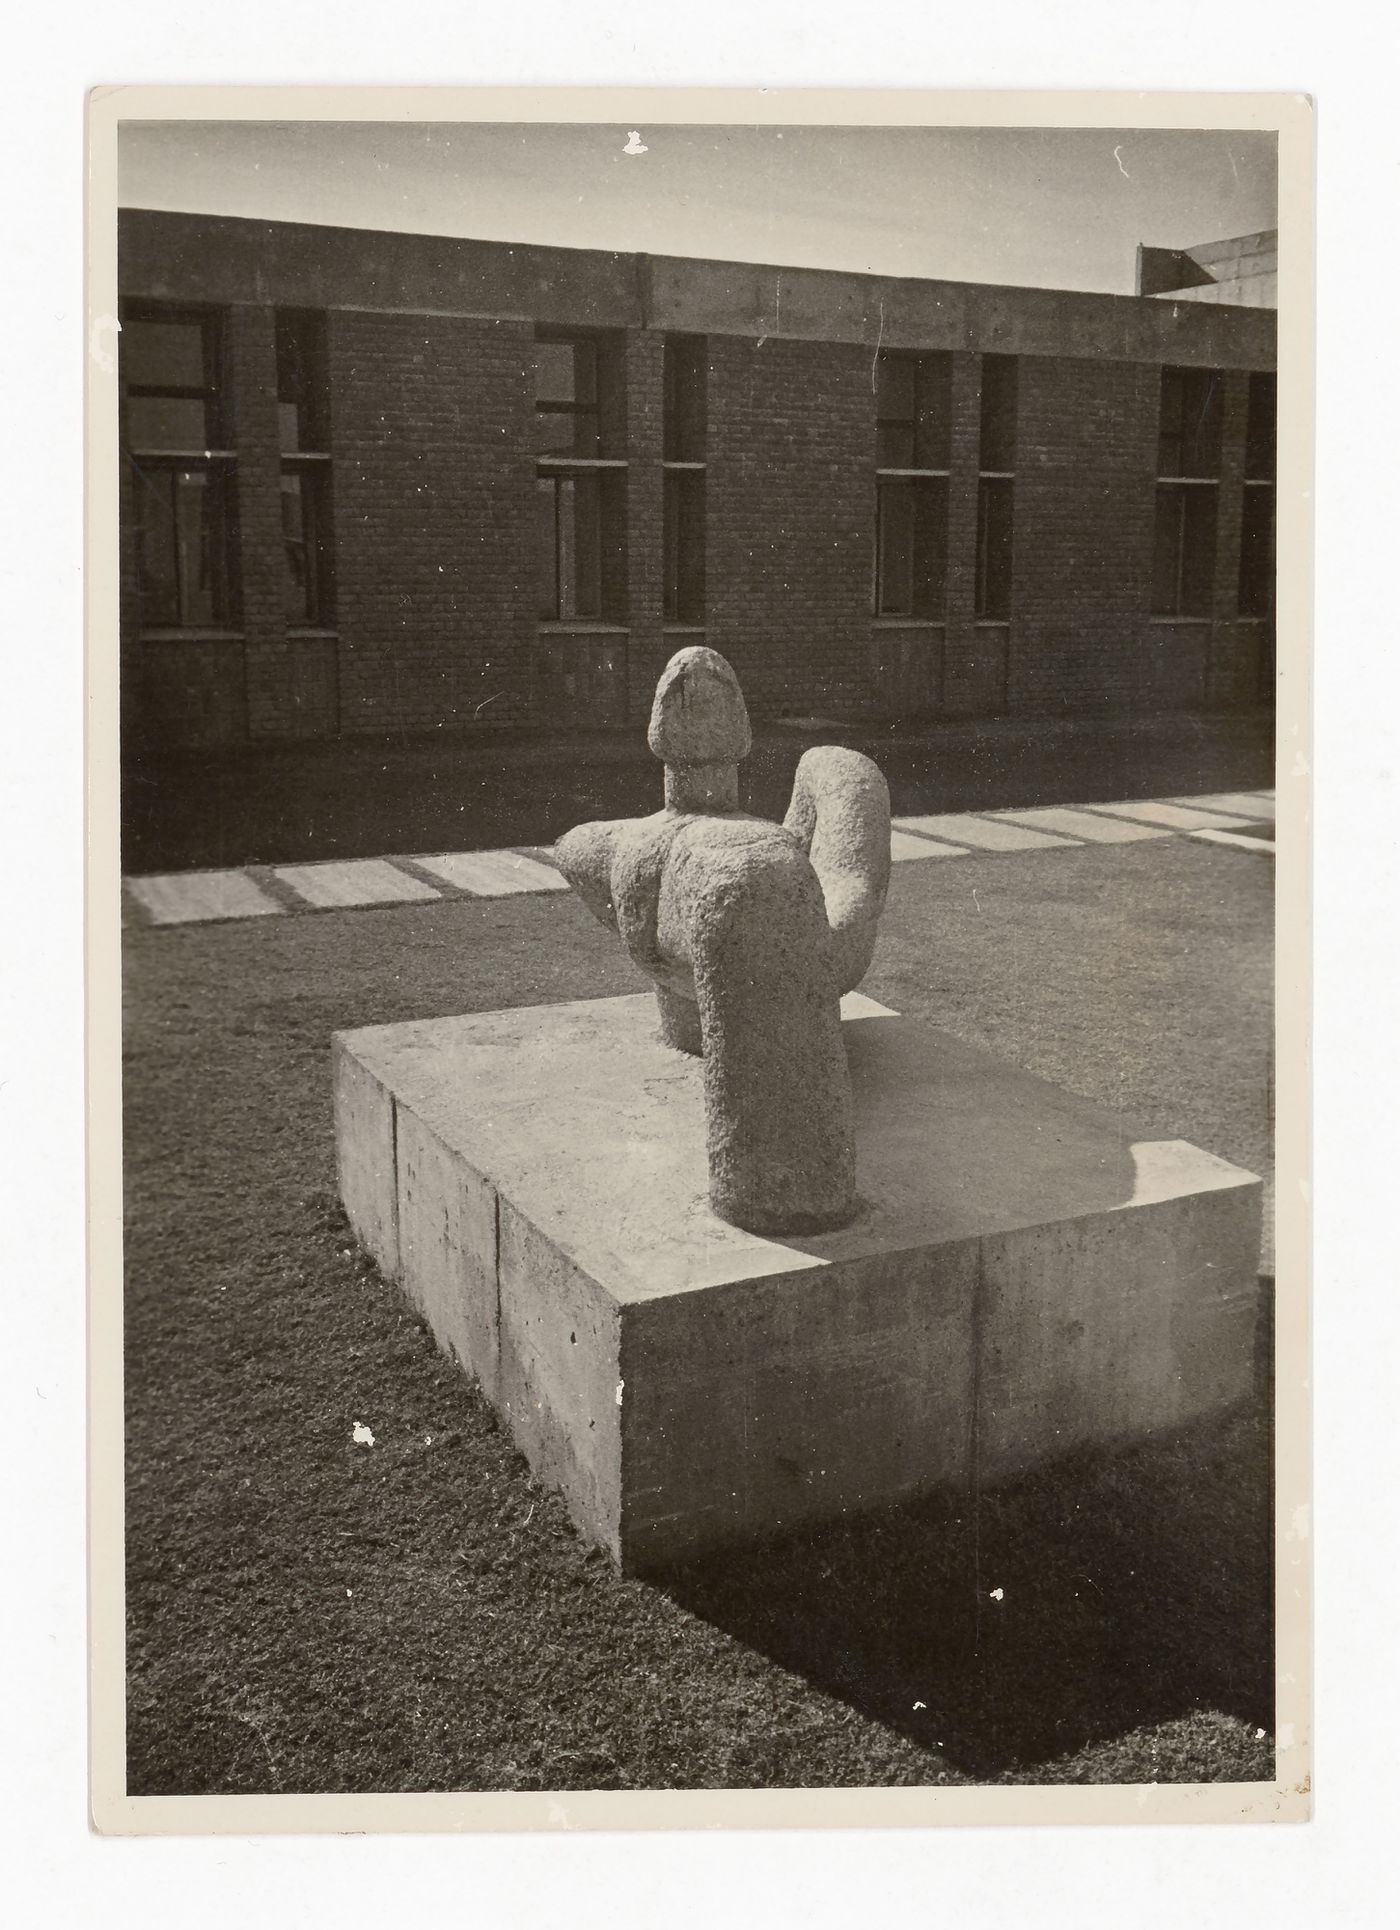 Photograph of a concrete sculpture at Punjab Agricultural University in Ludhiana, India